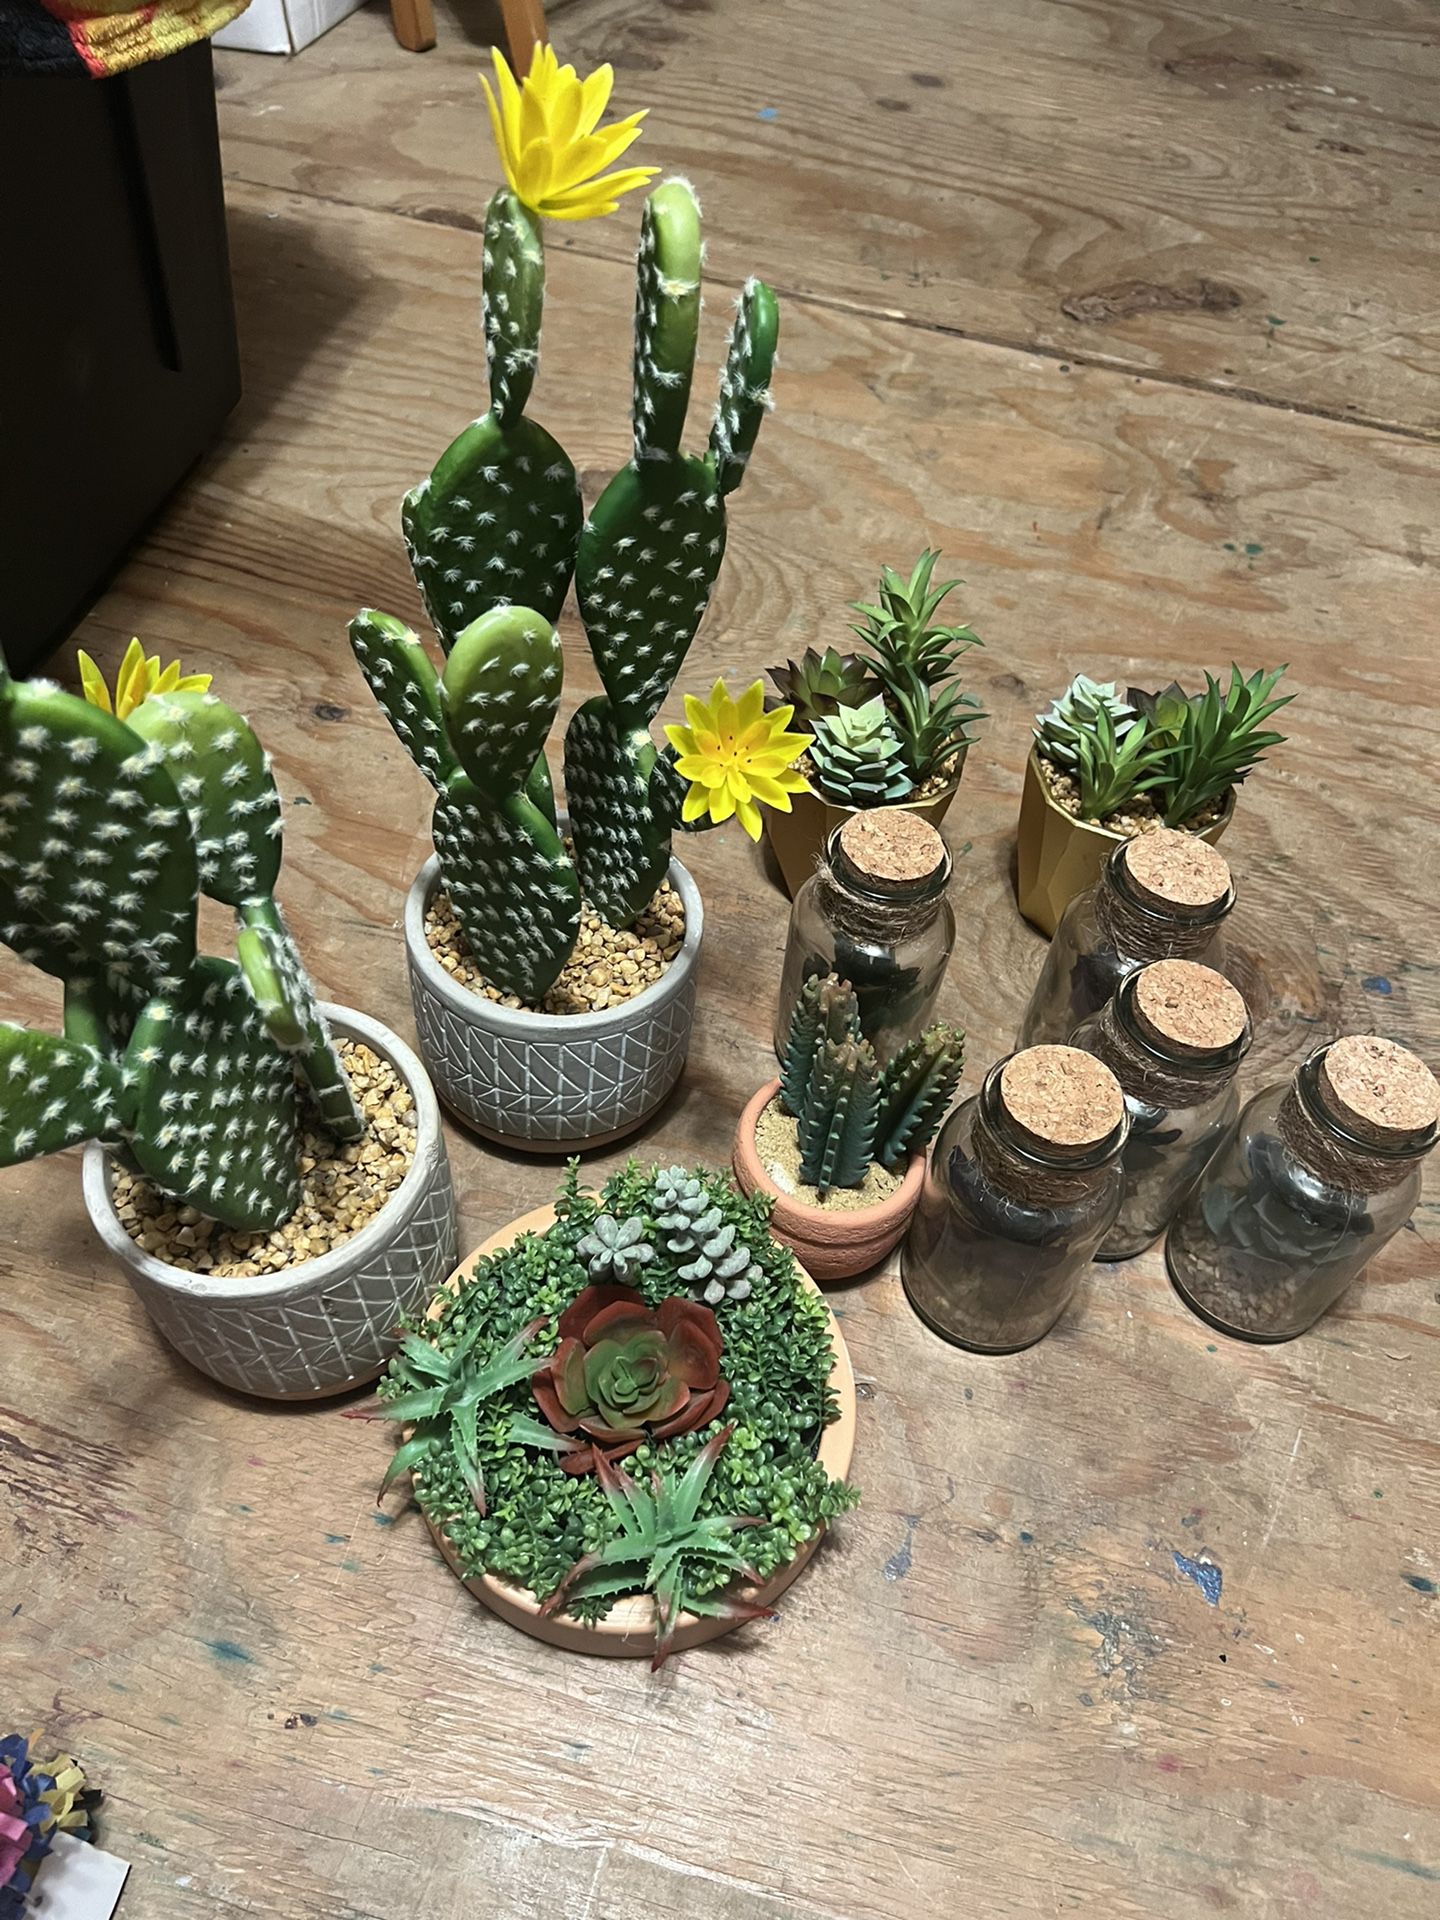 Cactus And Succulents